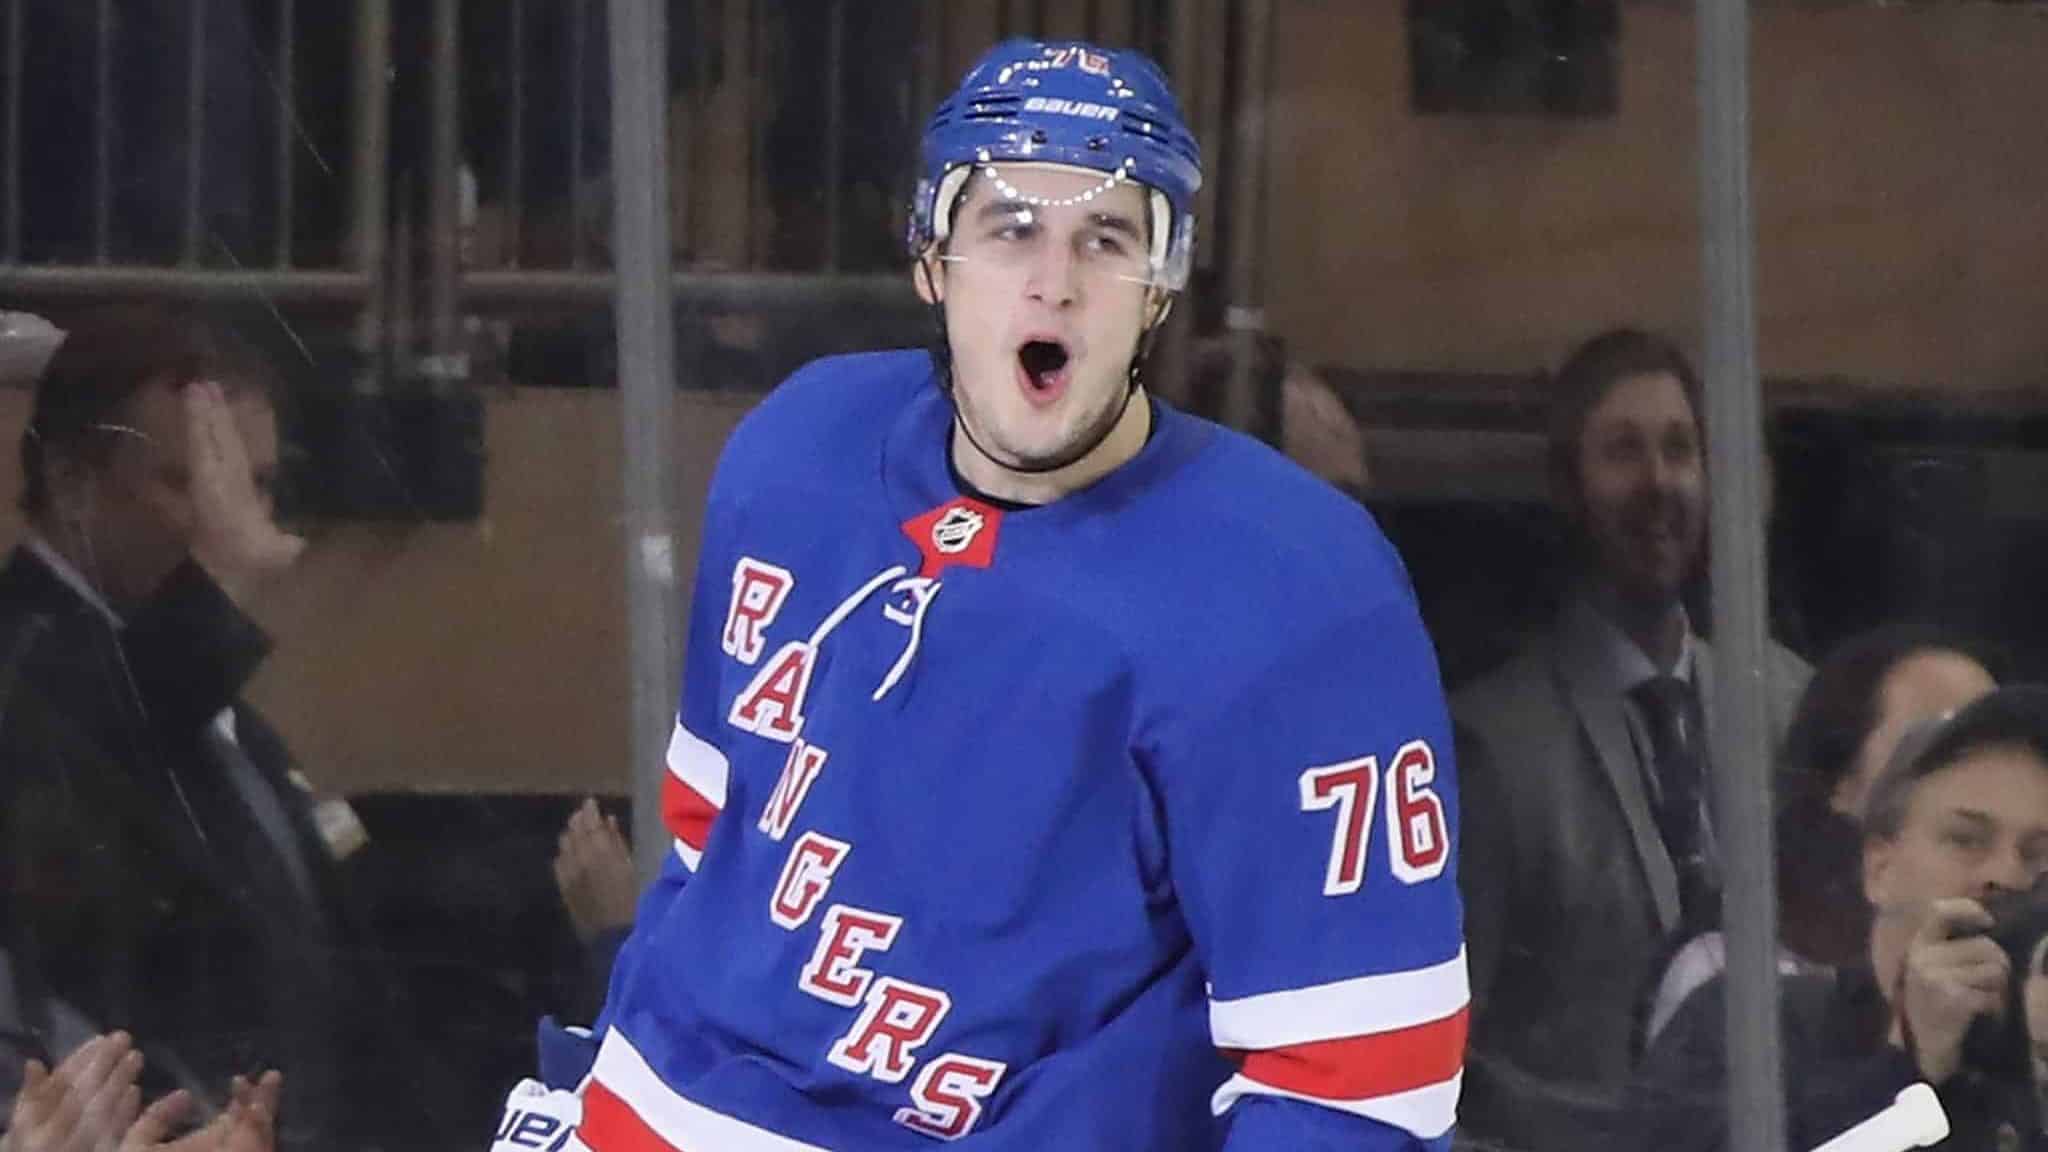 NEW YORK, NEW YORK - JANUARY 19: Brady Skjei #76 of the New York Rangers celebrates his goal at 18:23 of the first period against the Columbus Blue Jackets at Madison Square Garden on January 19, 2020 in New York City.